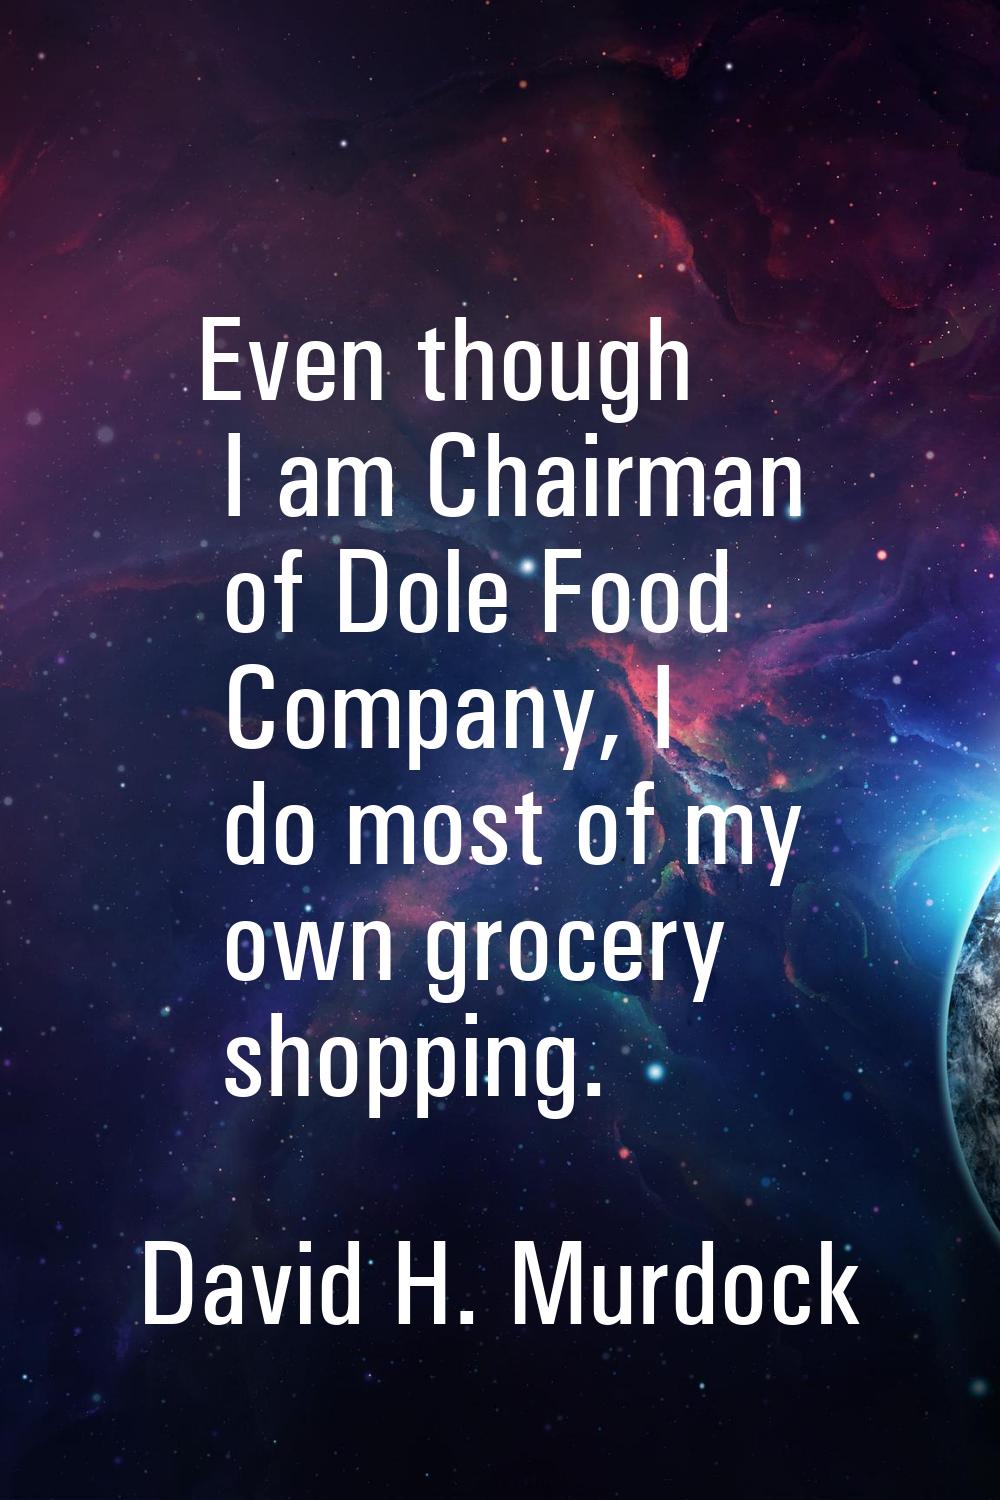 Even though I am Chairman of Dole Food Company, I do most of my own grocery shopping.